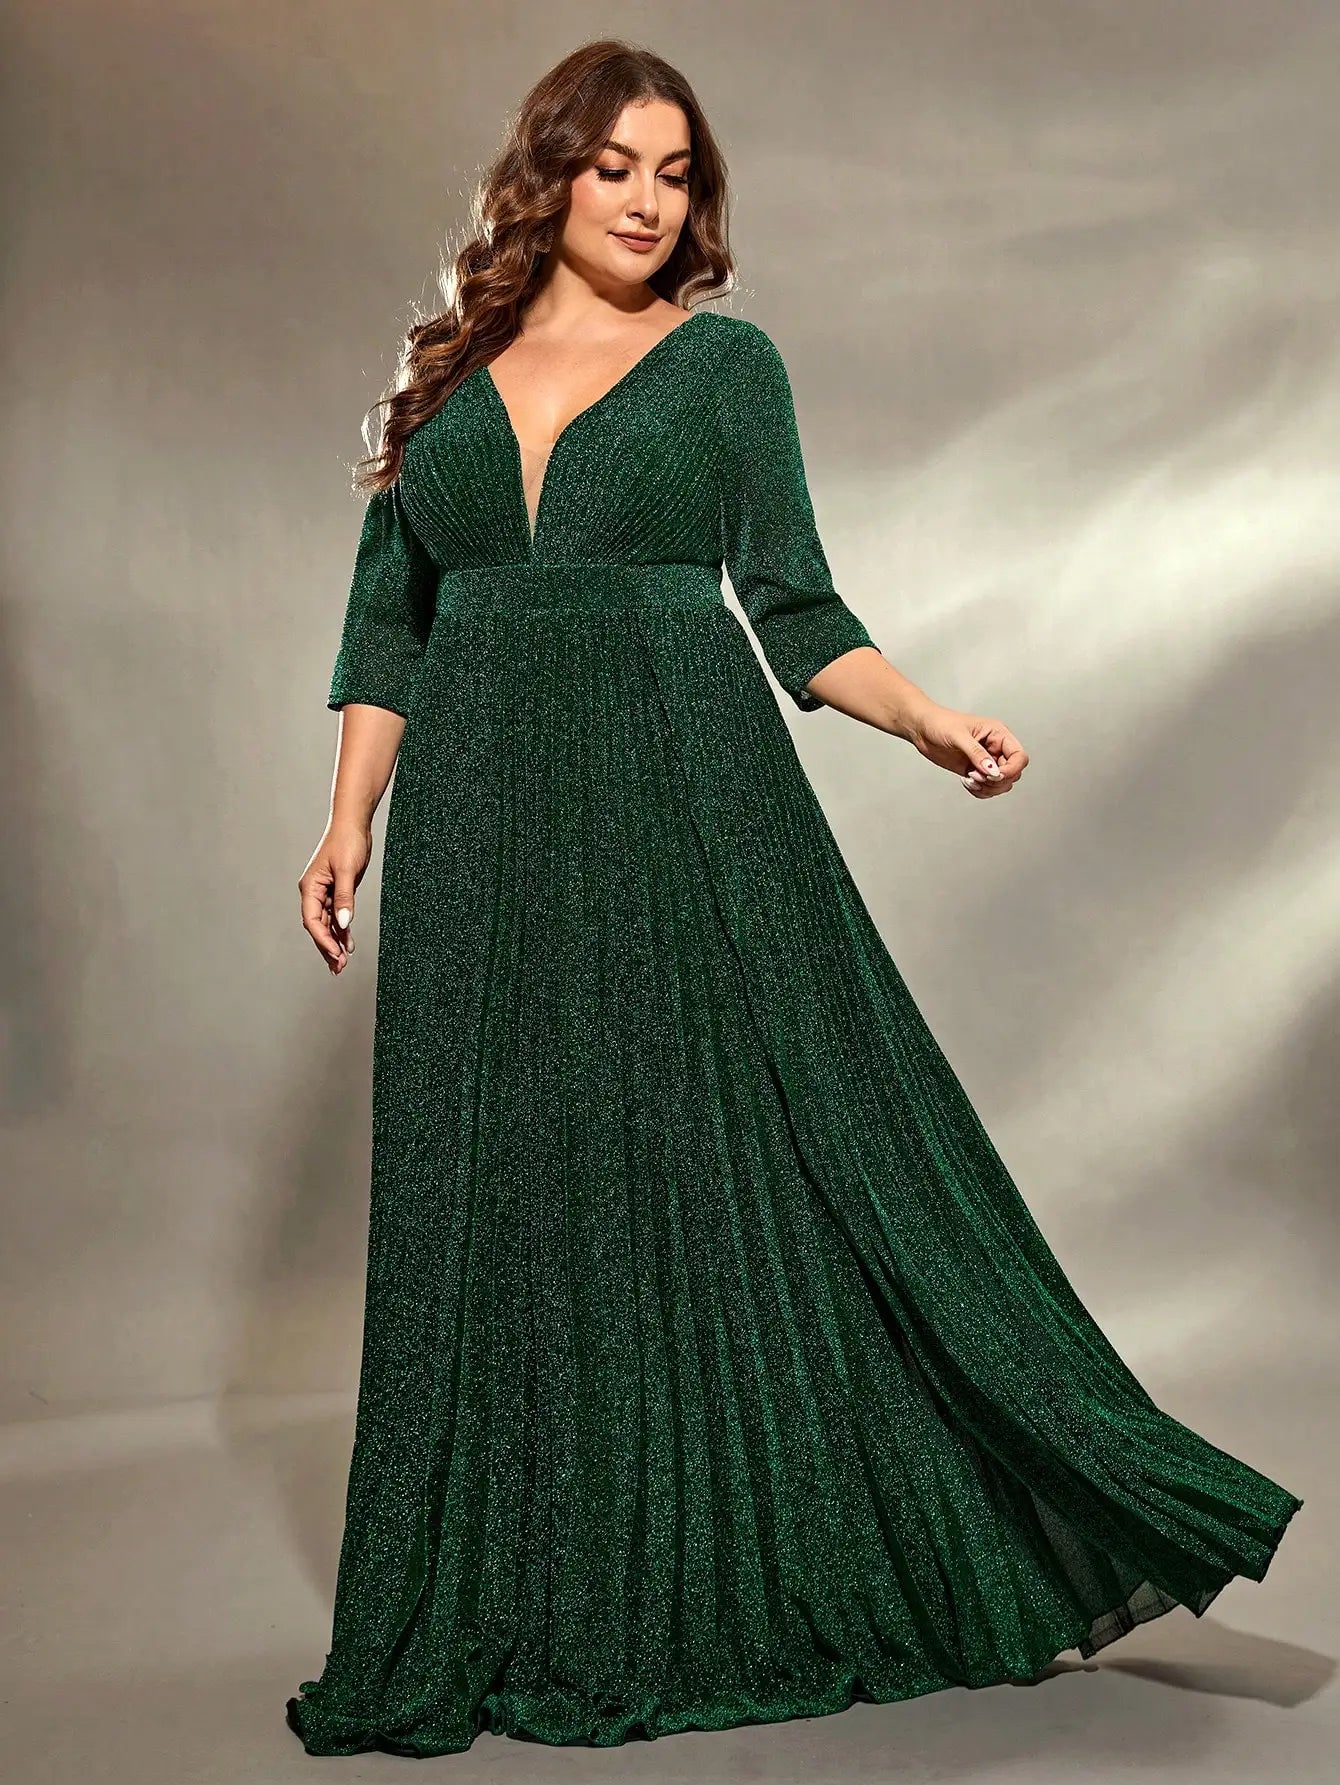 Mgiacy plus size V-neck pleated sequin maxi gown Evening gown Ball dress Party dress Bridesmaid dress